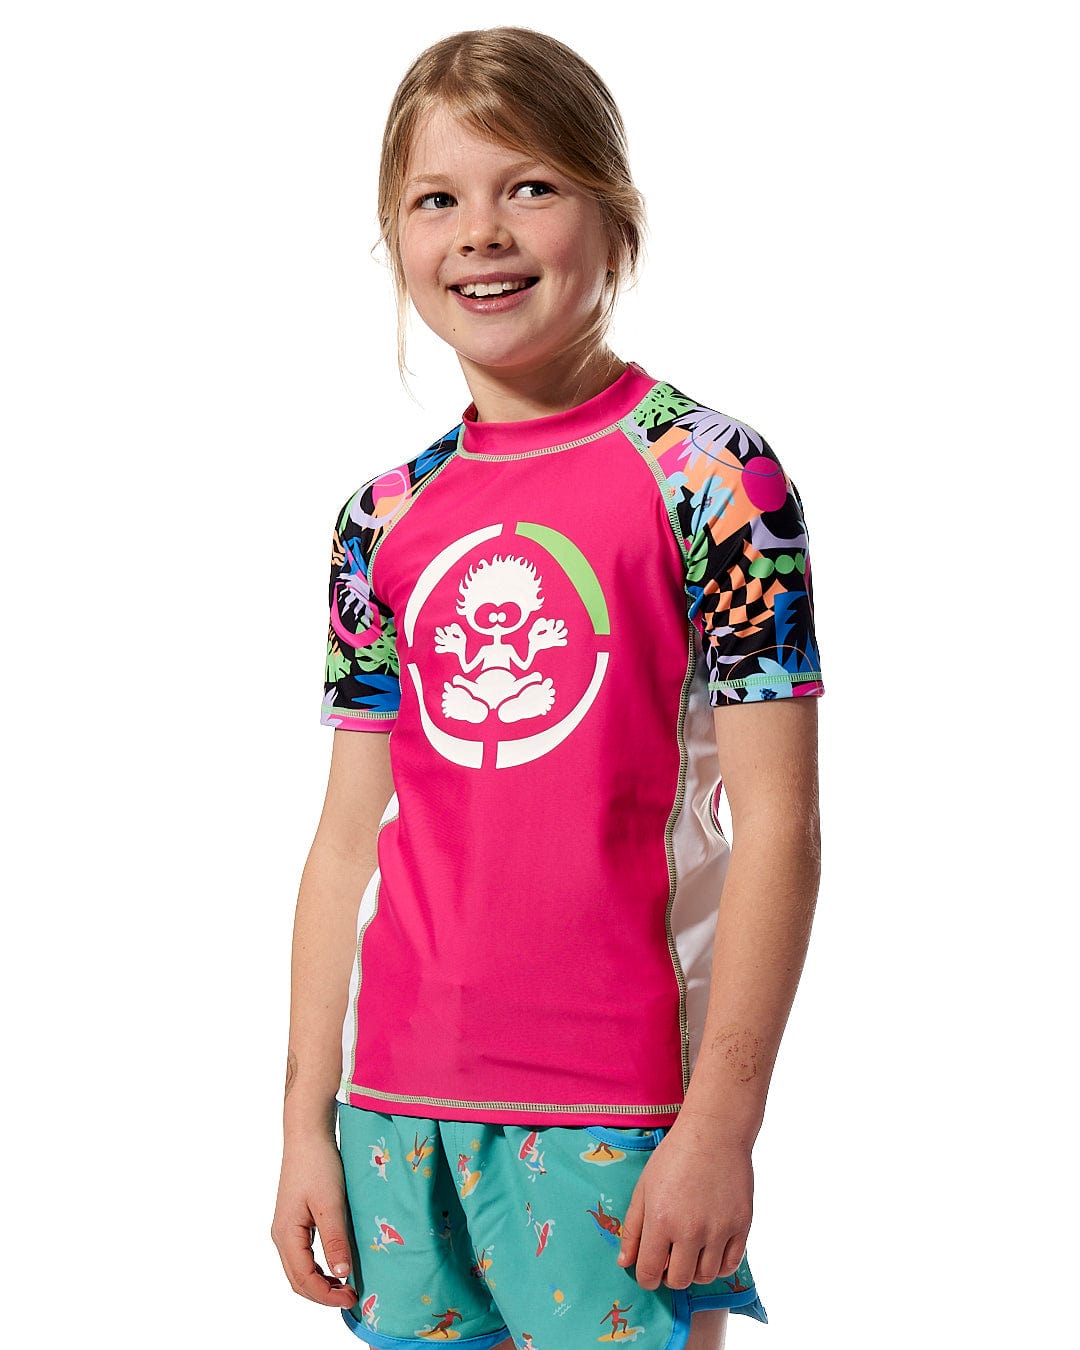 A girl wearing a Zephyr - Kids UPF 50+ Short Sleeve Rashvest in Pink by Saltrock for sun protection.